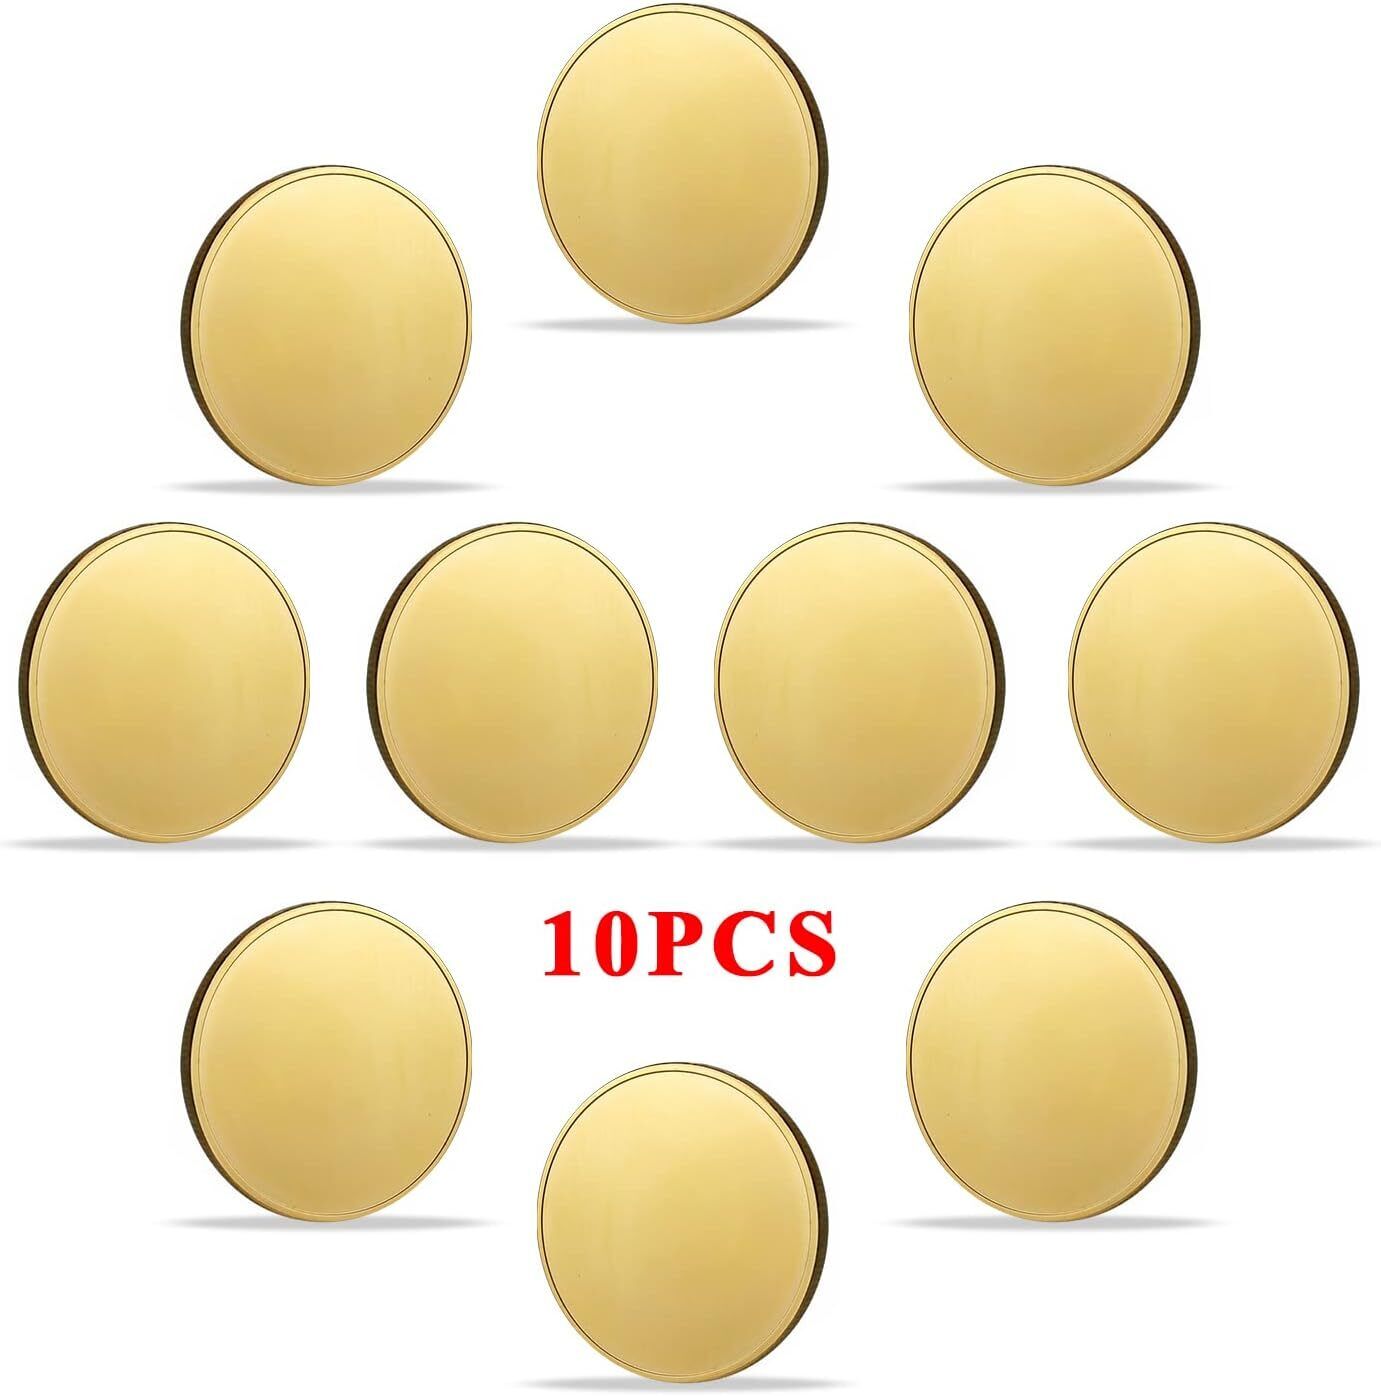 10pcs Gold Plated Blank Challenge Coin Laser Engravable Pattern for DIY Crafts